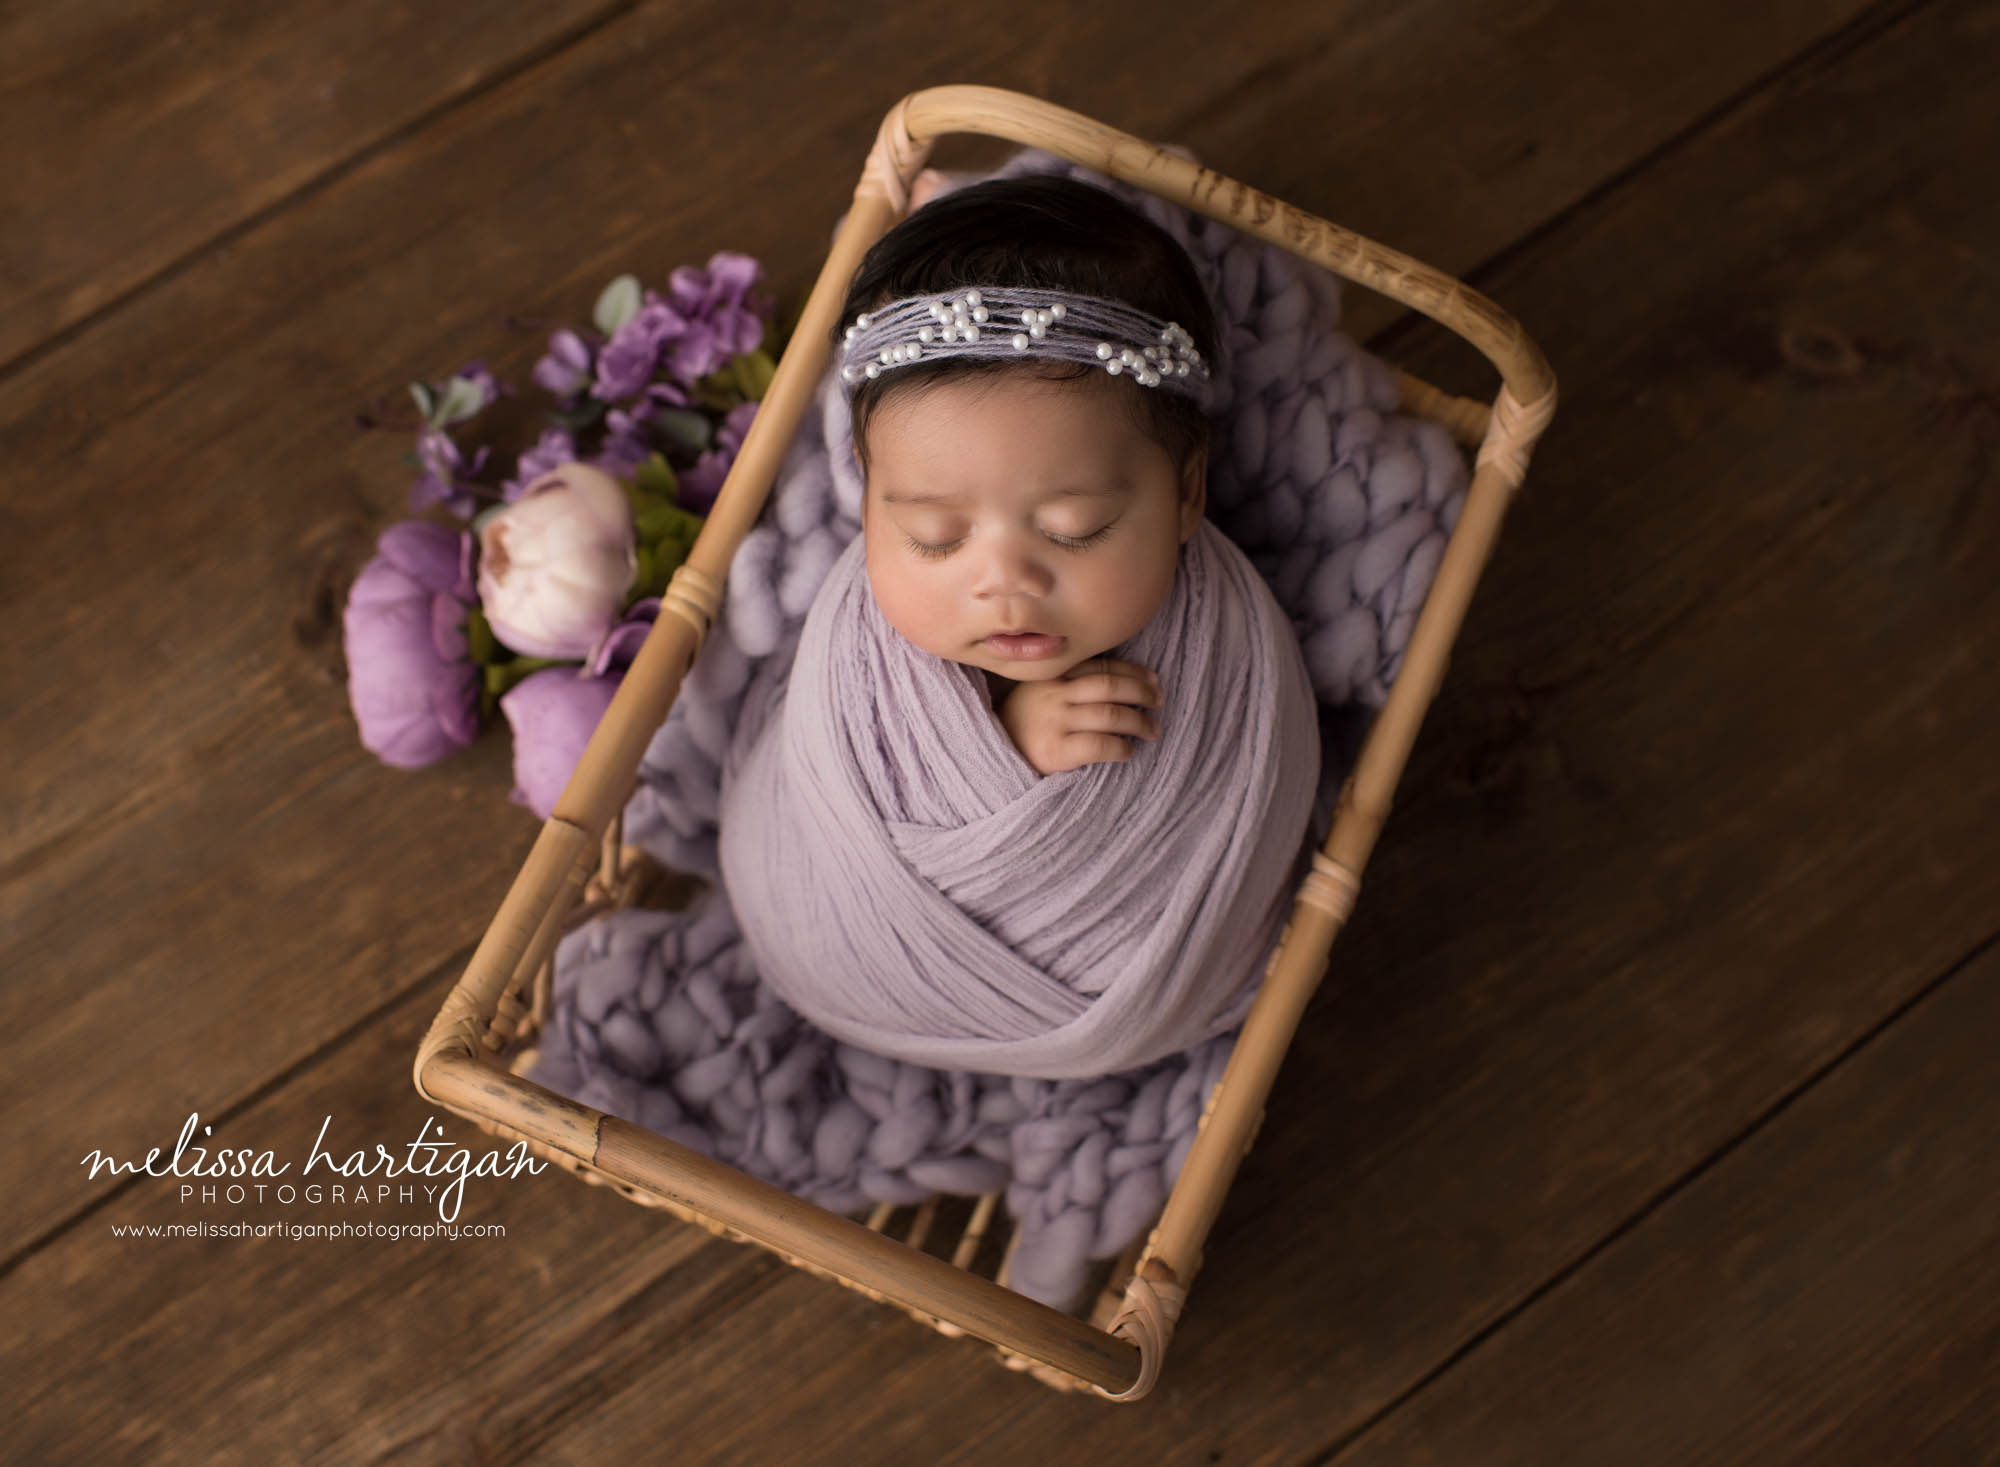 newborn baby girl wrapped in lavendar colored wrap posed in basket